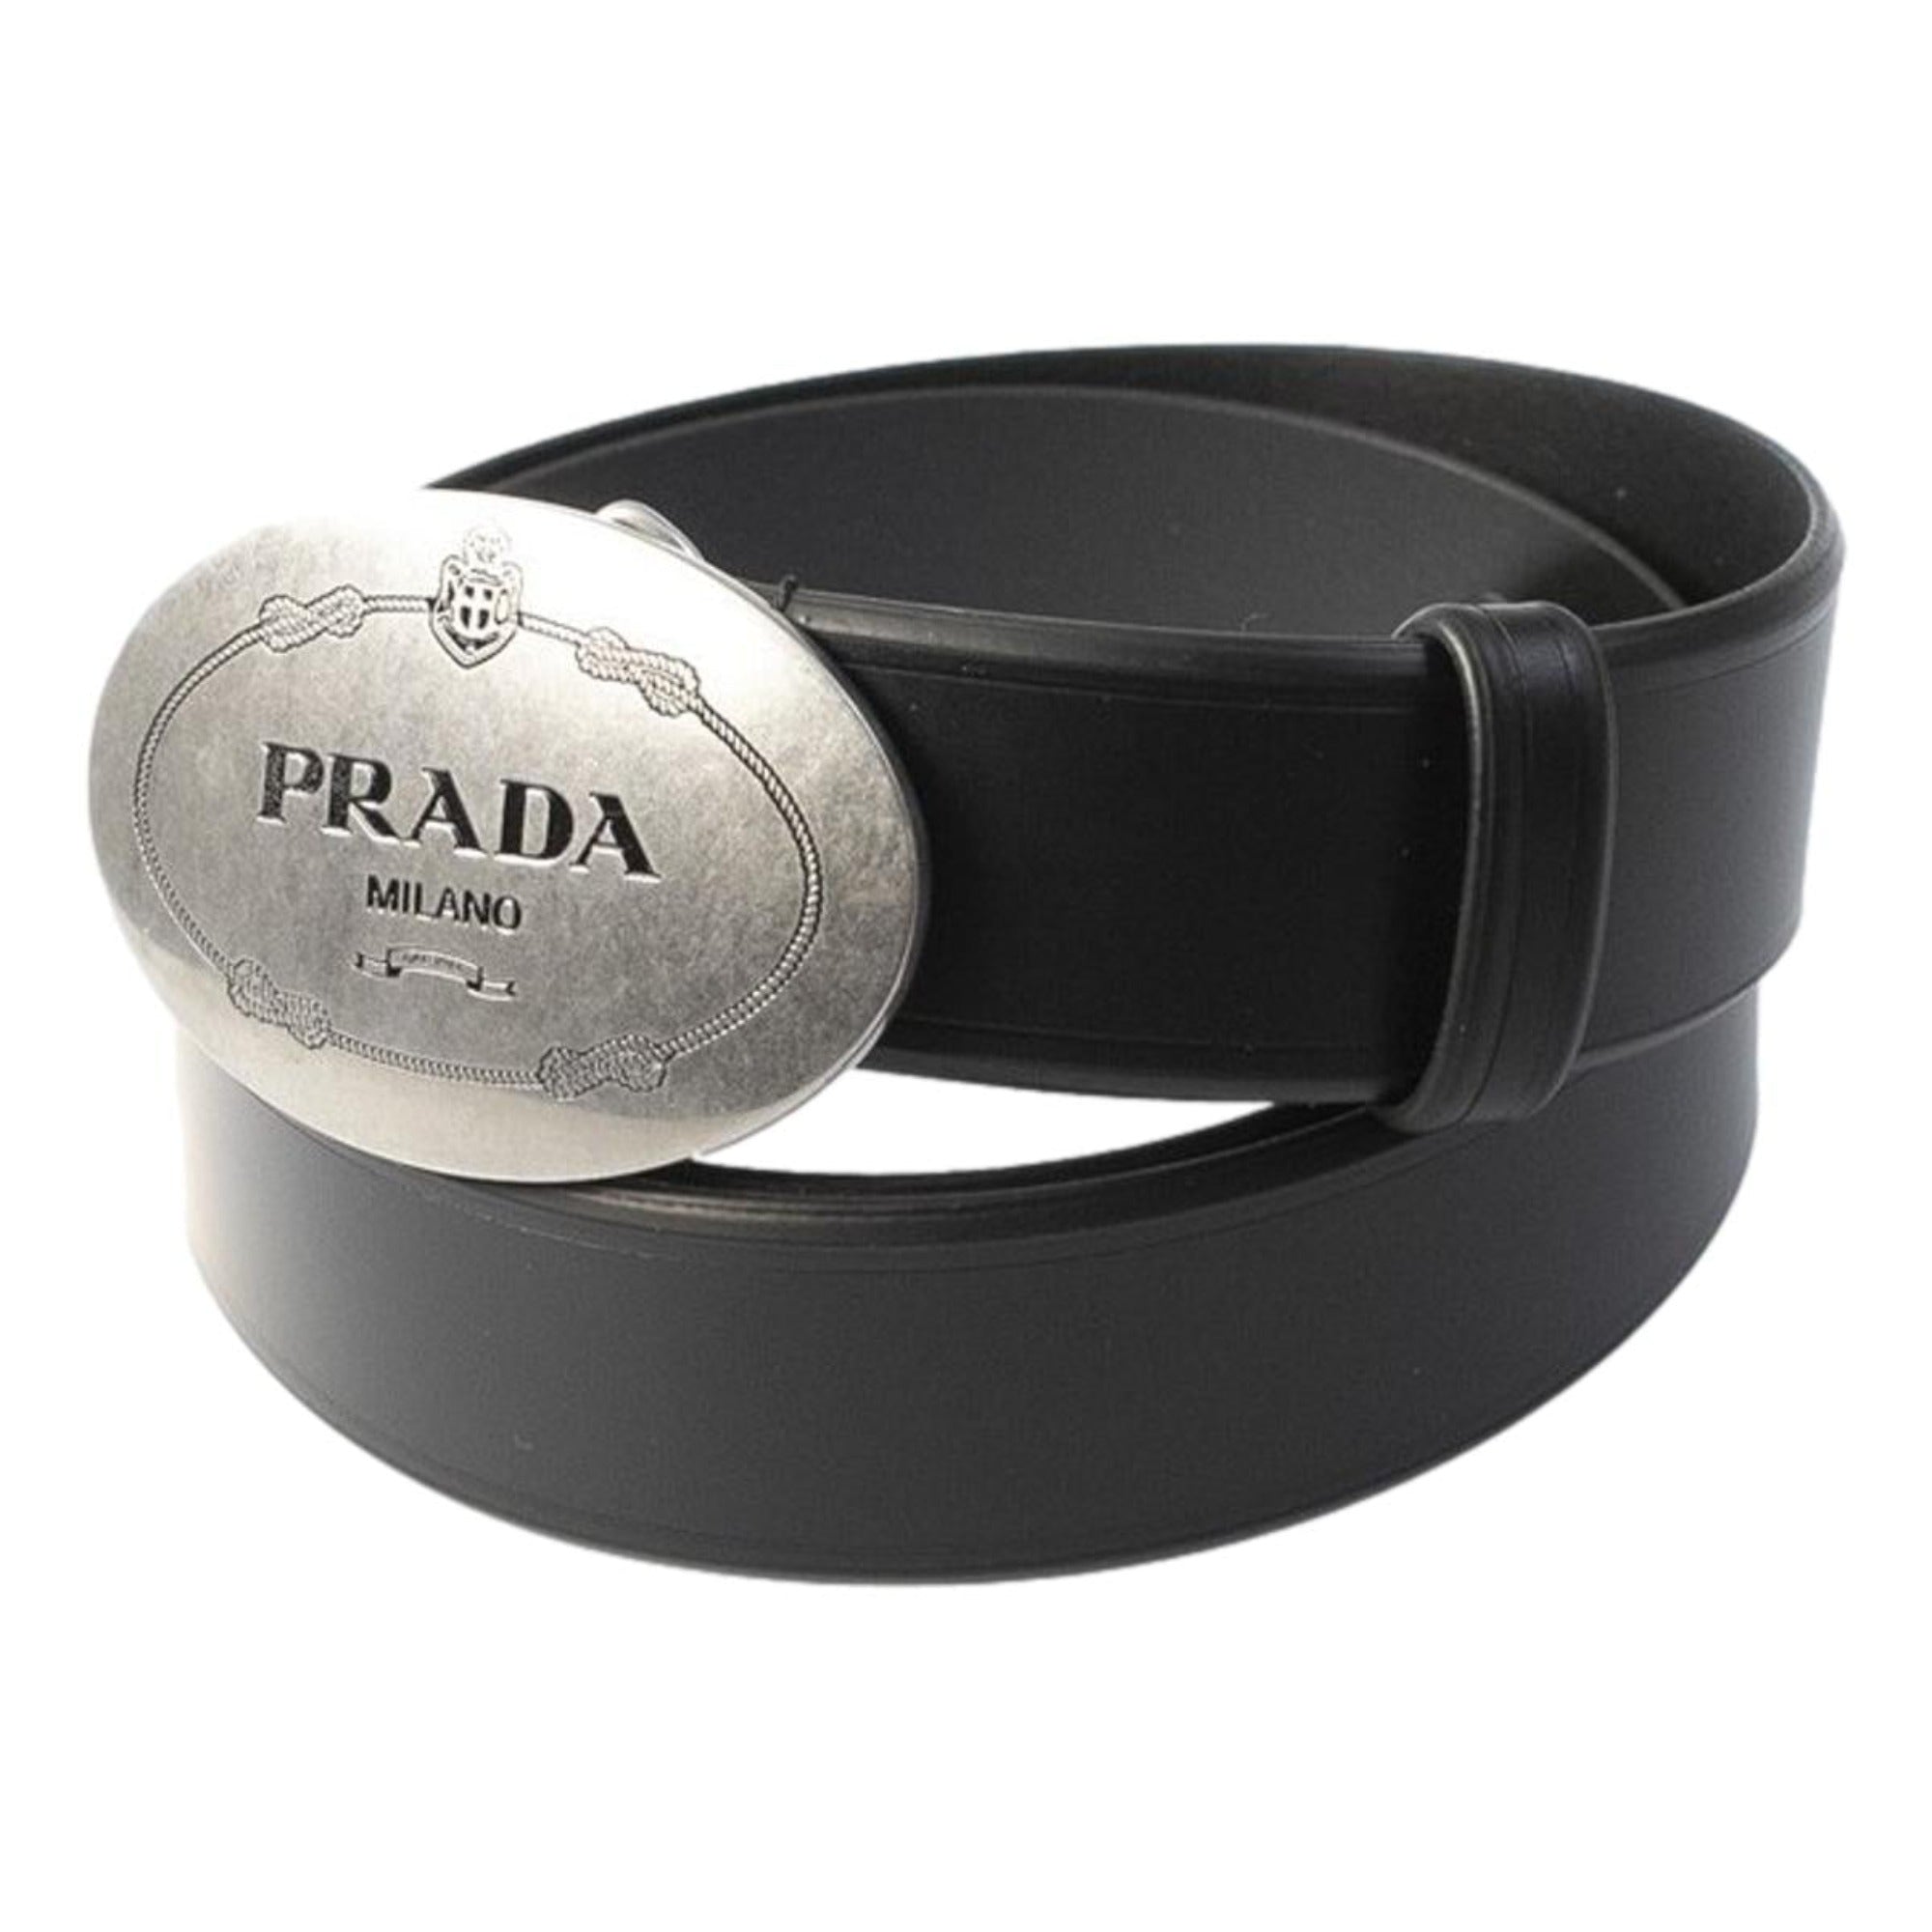 Prada Navy Blue Saffiano Leather Belt Brushed Silver Buckle 110/44 2CM046 at_Queen_Bee_of_Beverly_Hills